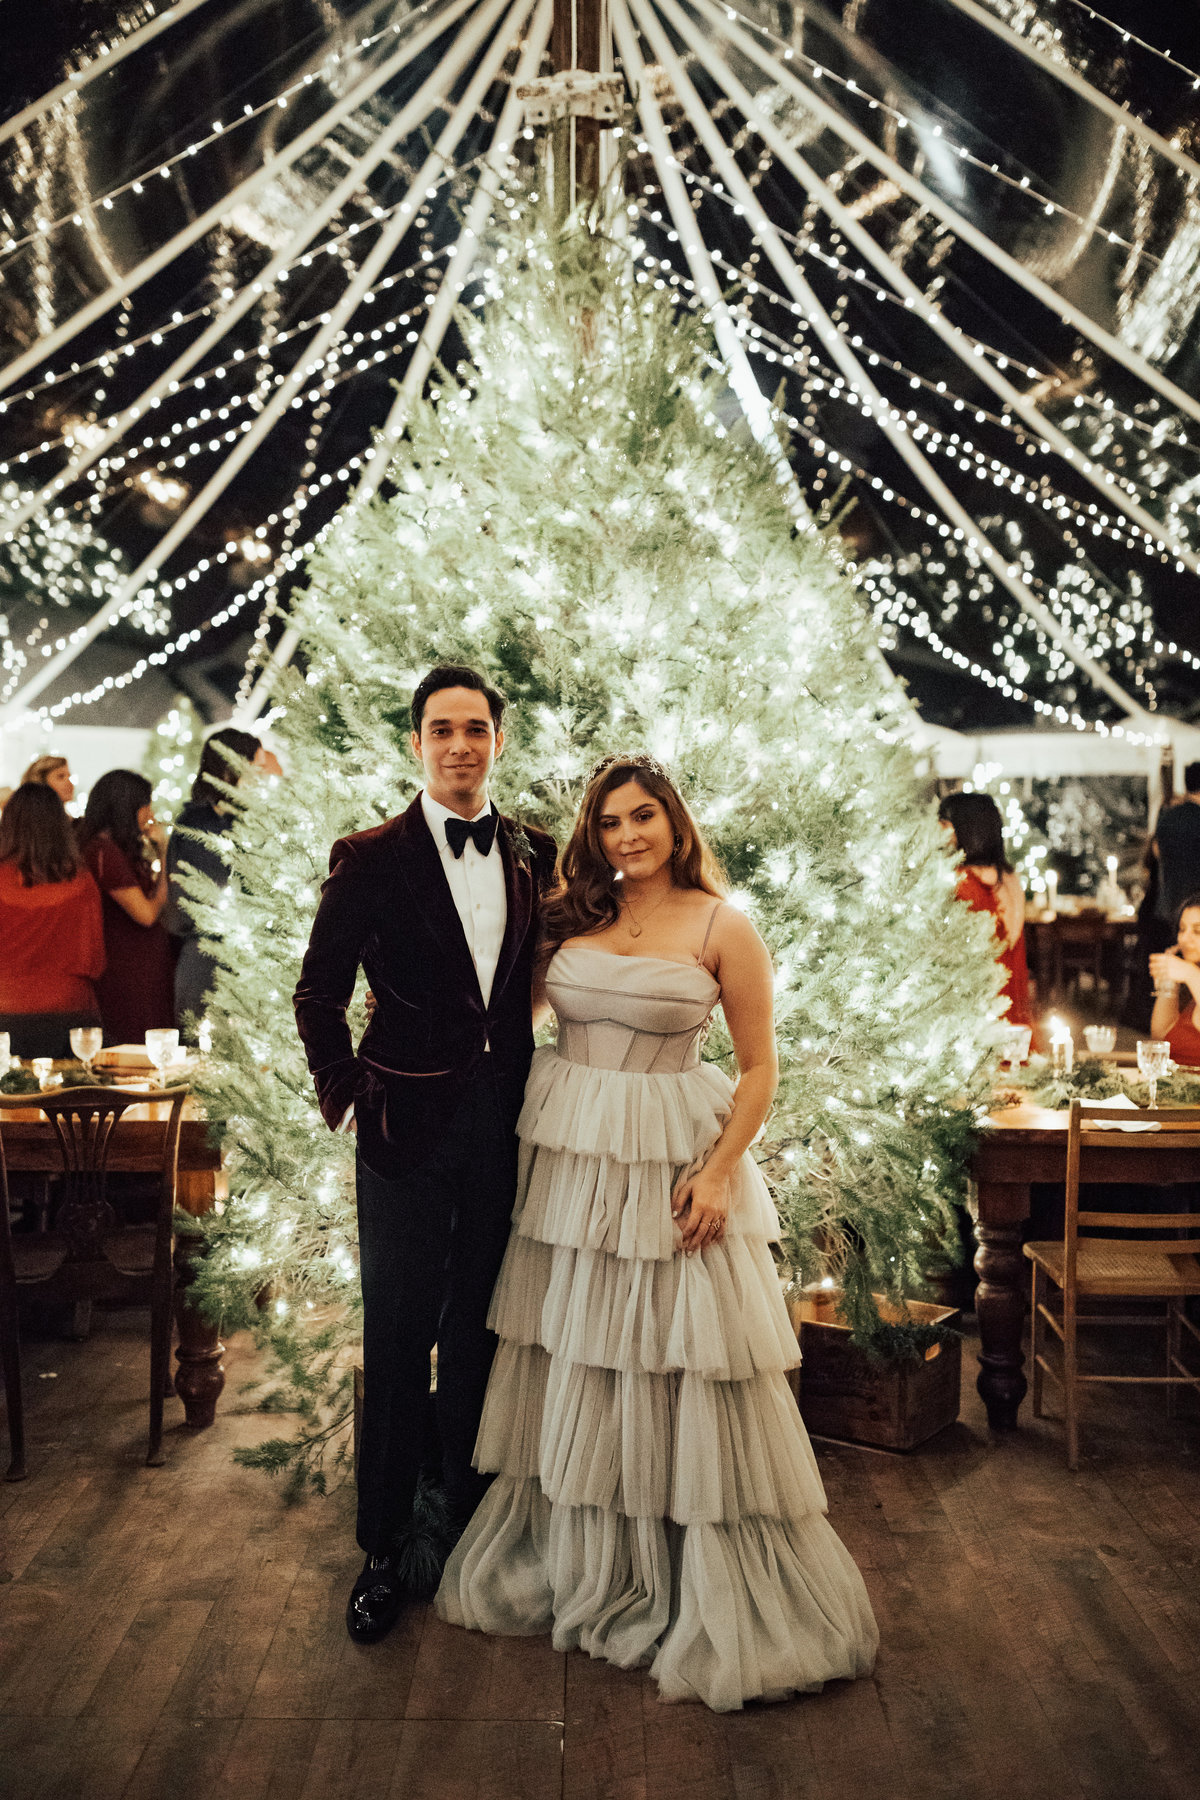 Christy-l-Johnston-Photography-Monica-Relyea-Events-Noelle-Downing-Instagram-Noelle_s-Favorite-Day-Wedding-Battenfelds-Christmas-tree-farm-Red-Hook-New-York-Hudson-Valley-upstate-november-2019-AP1A0232